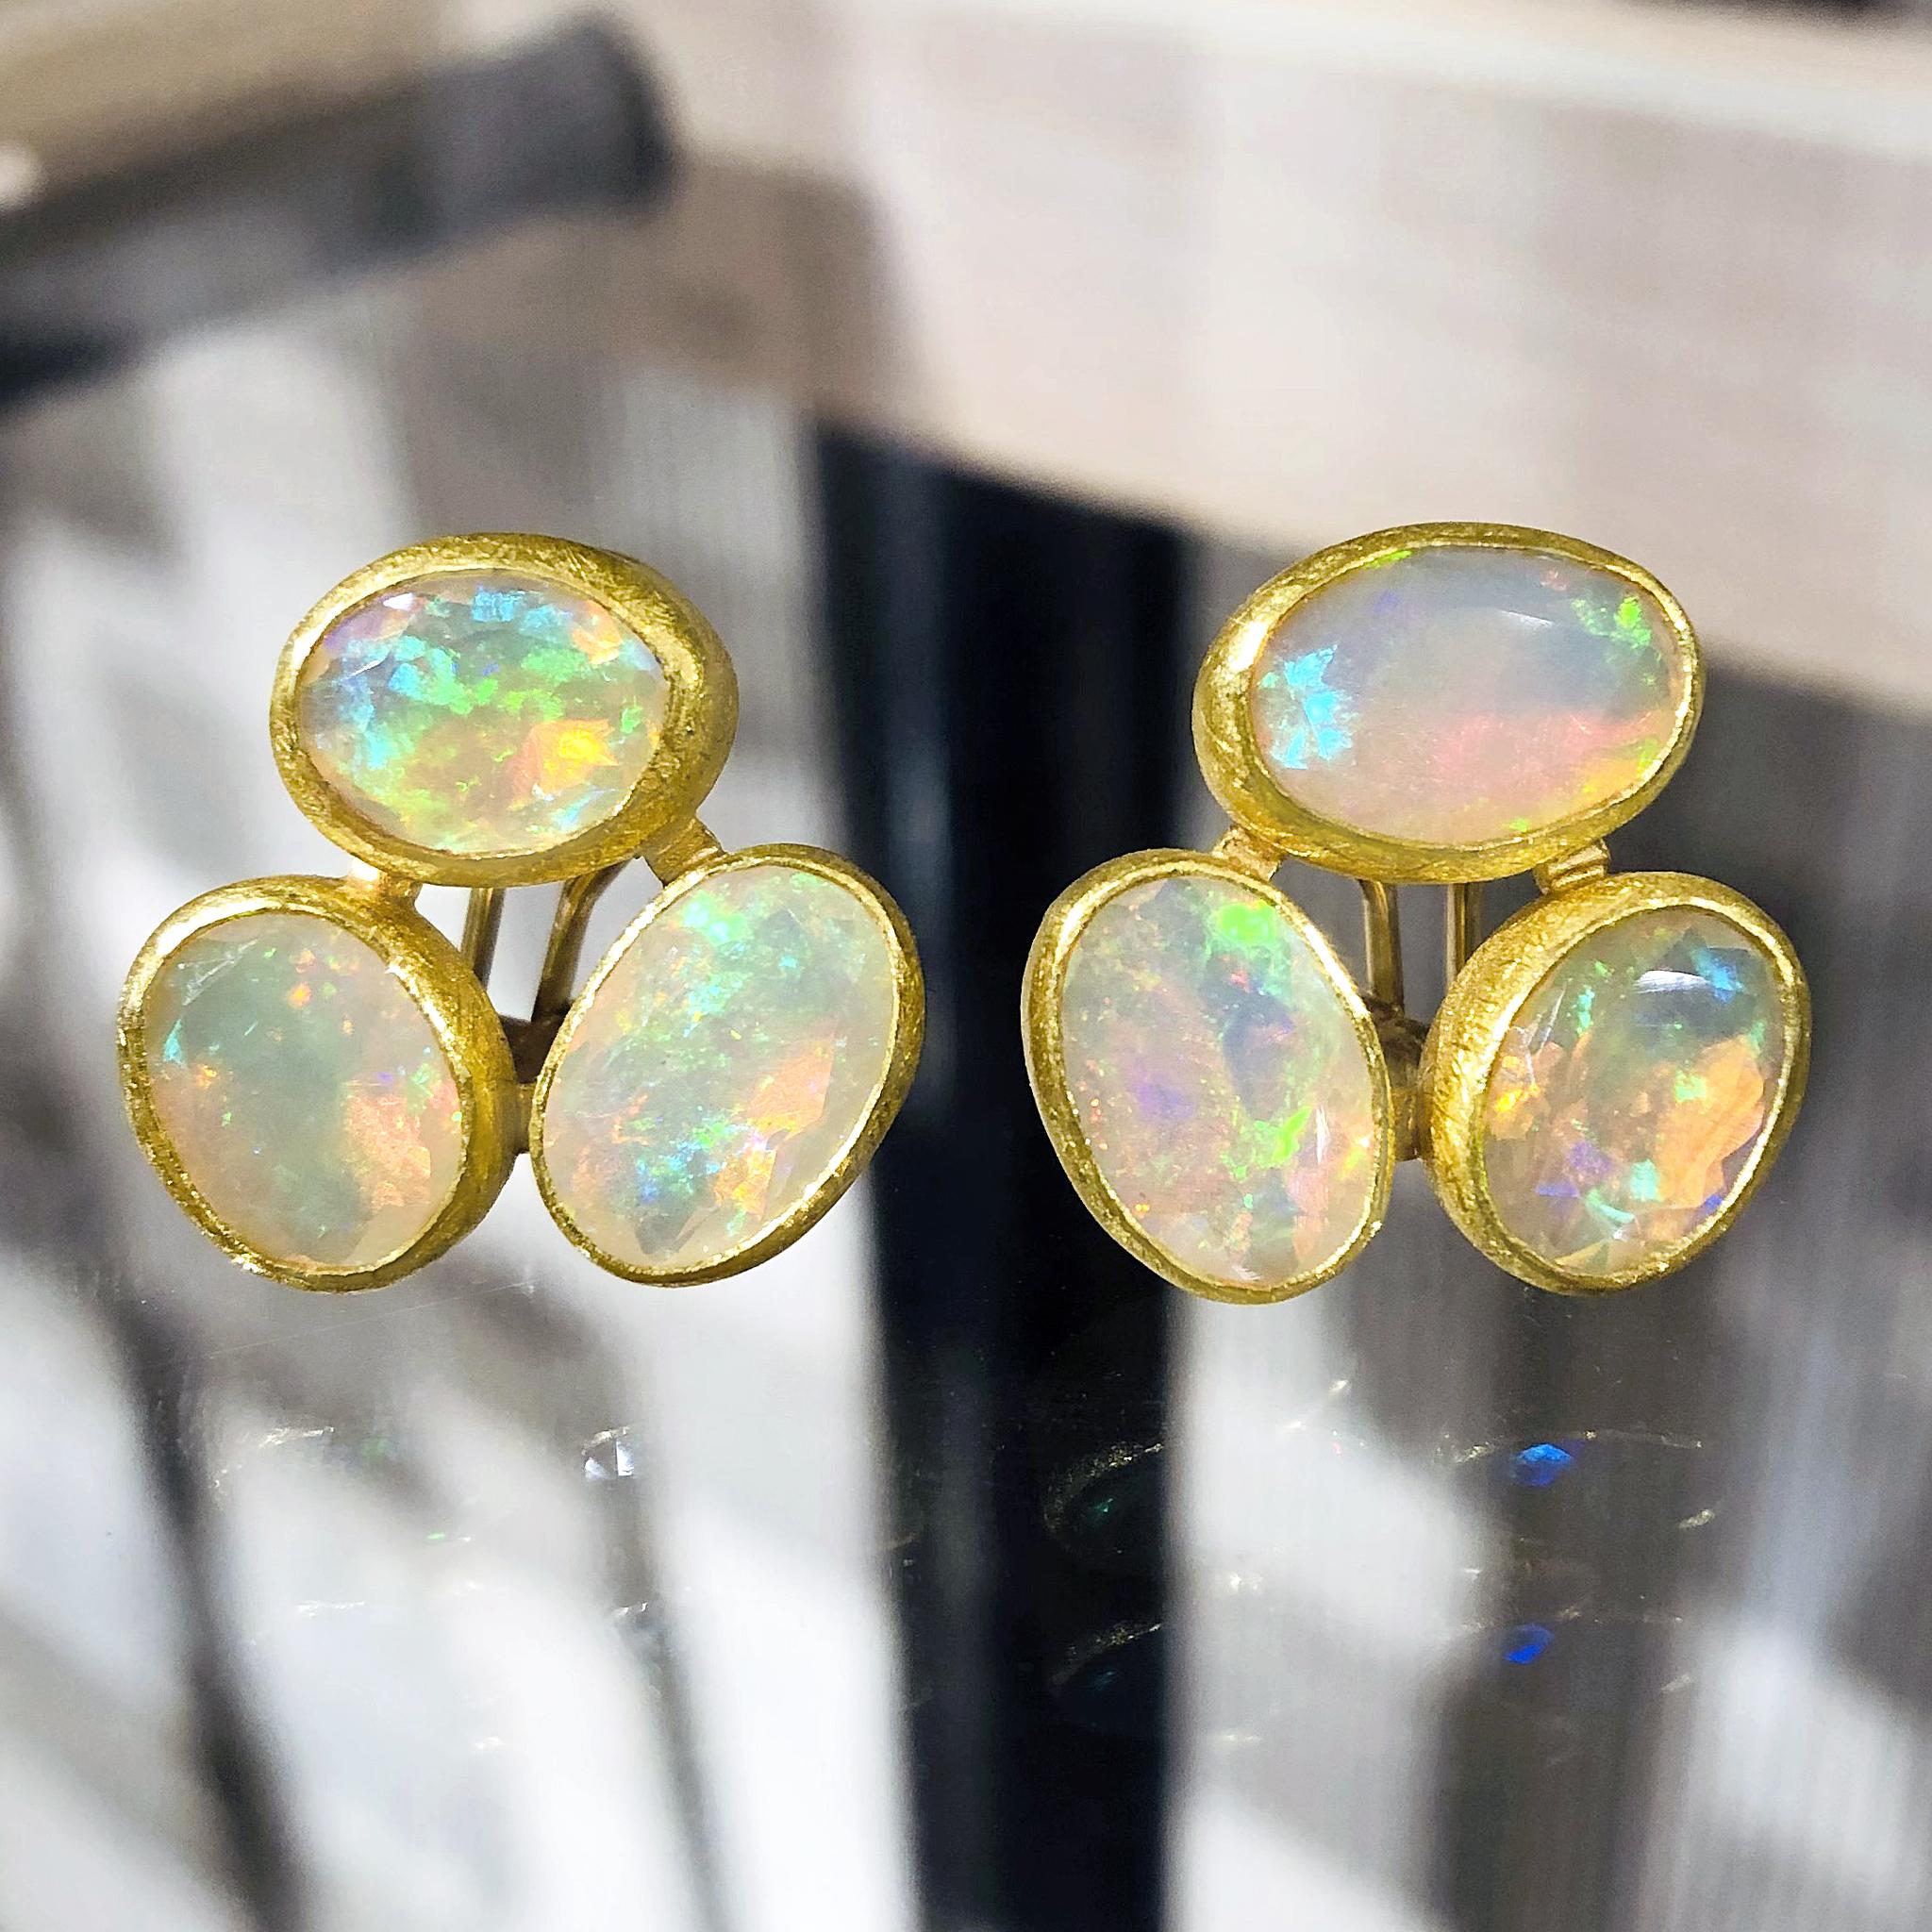 Triple Stud Earrings handmade by acclaimed jewelry maker Petra Class in signature finely-textured 22k yellow gold featuring four total carats of perfectly-matched faceted white Ethiopian opals with primary flashes of strong neon green and orange,